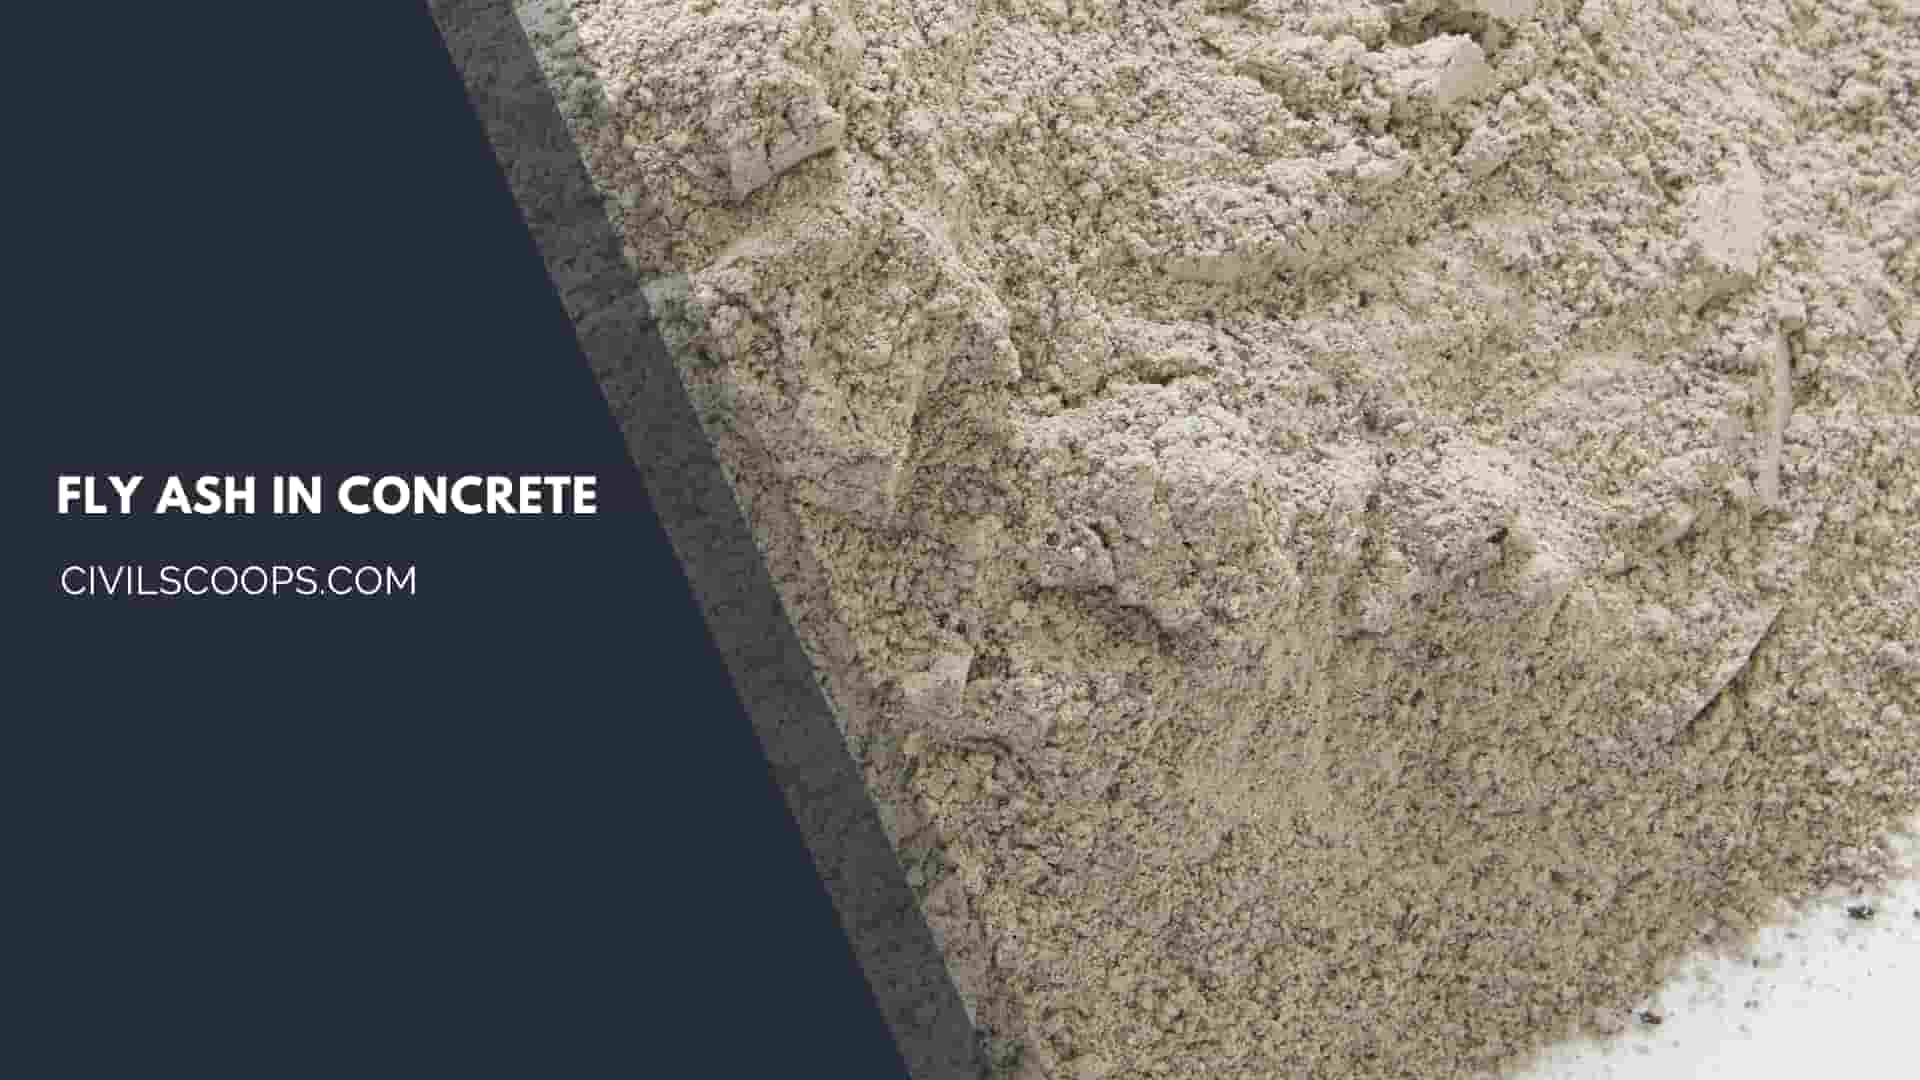 Fly Ash in Concrete